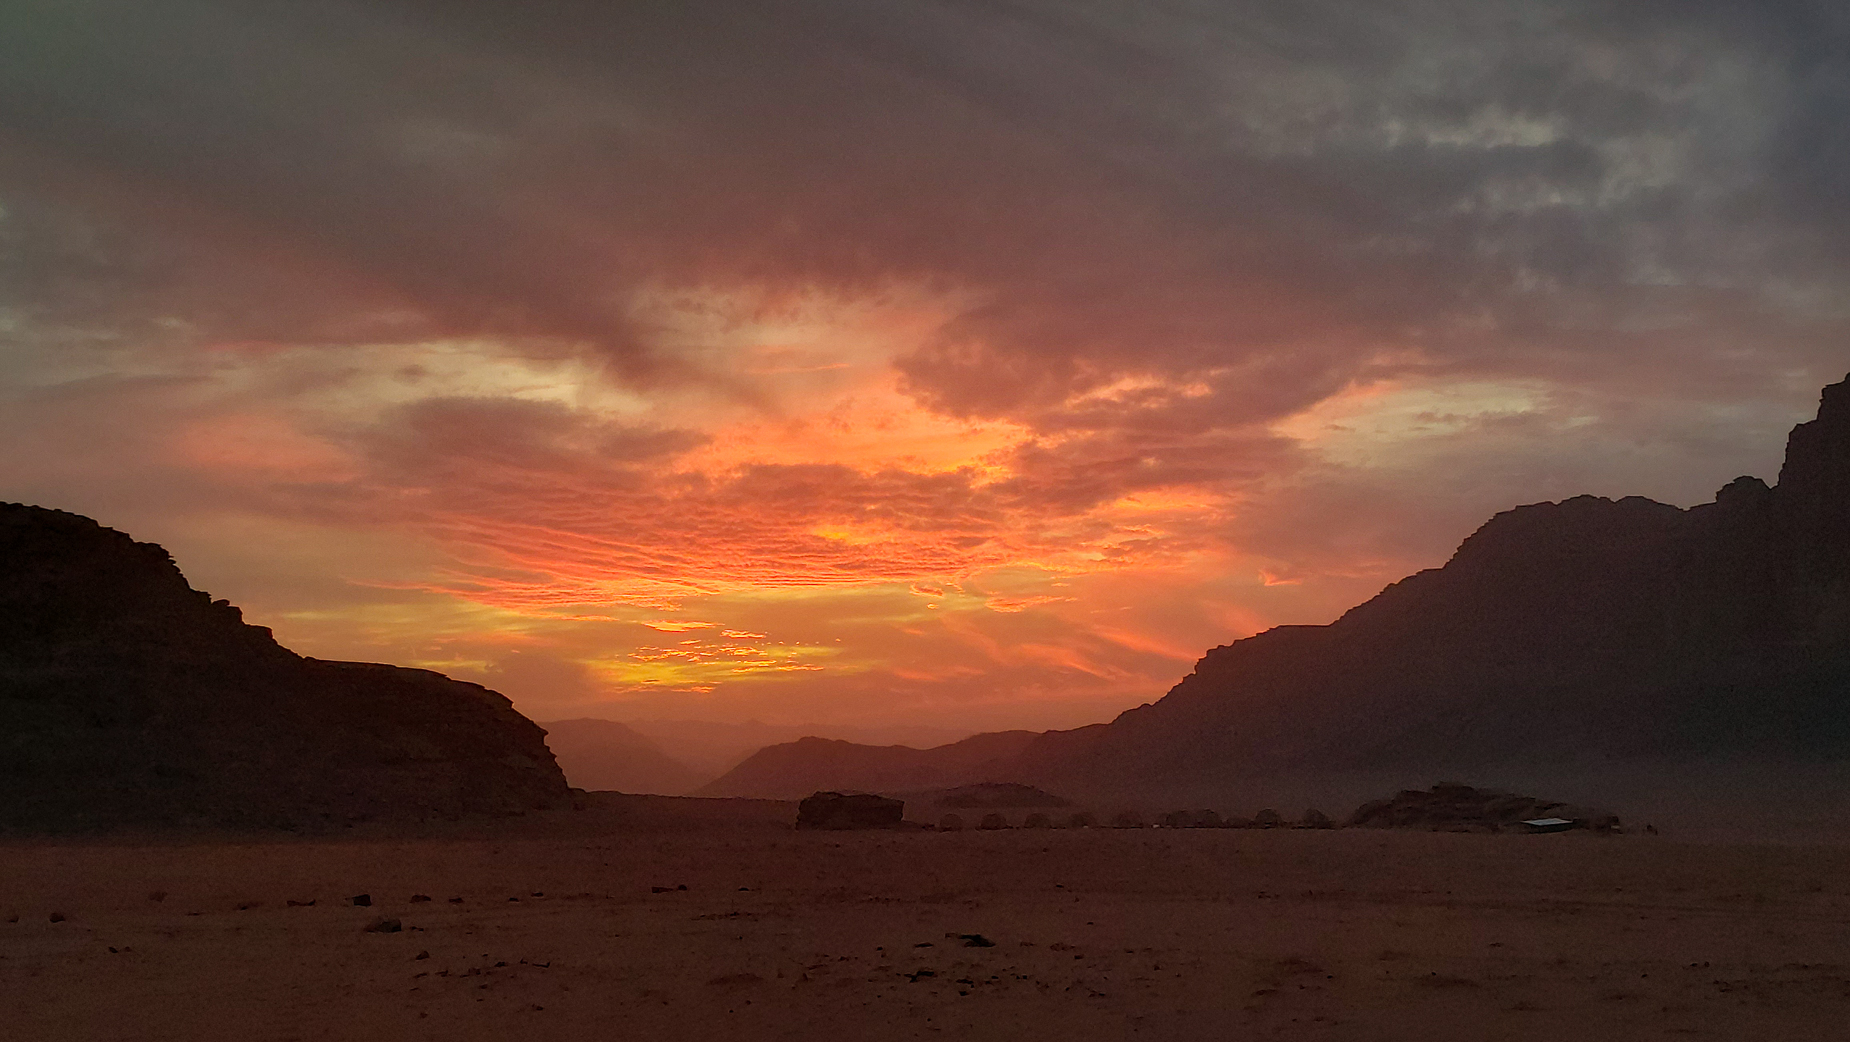 <span  class="uc_style_uc_tiles_grid_image_elementor_uc_items_attribute_title" style="color:#ffffff;">Amazing sunsets in Wadi Rum</span>